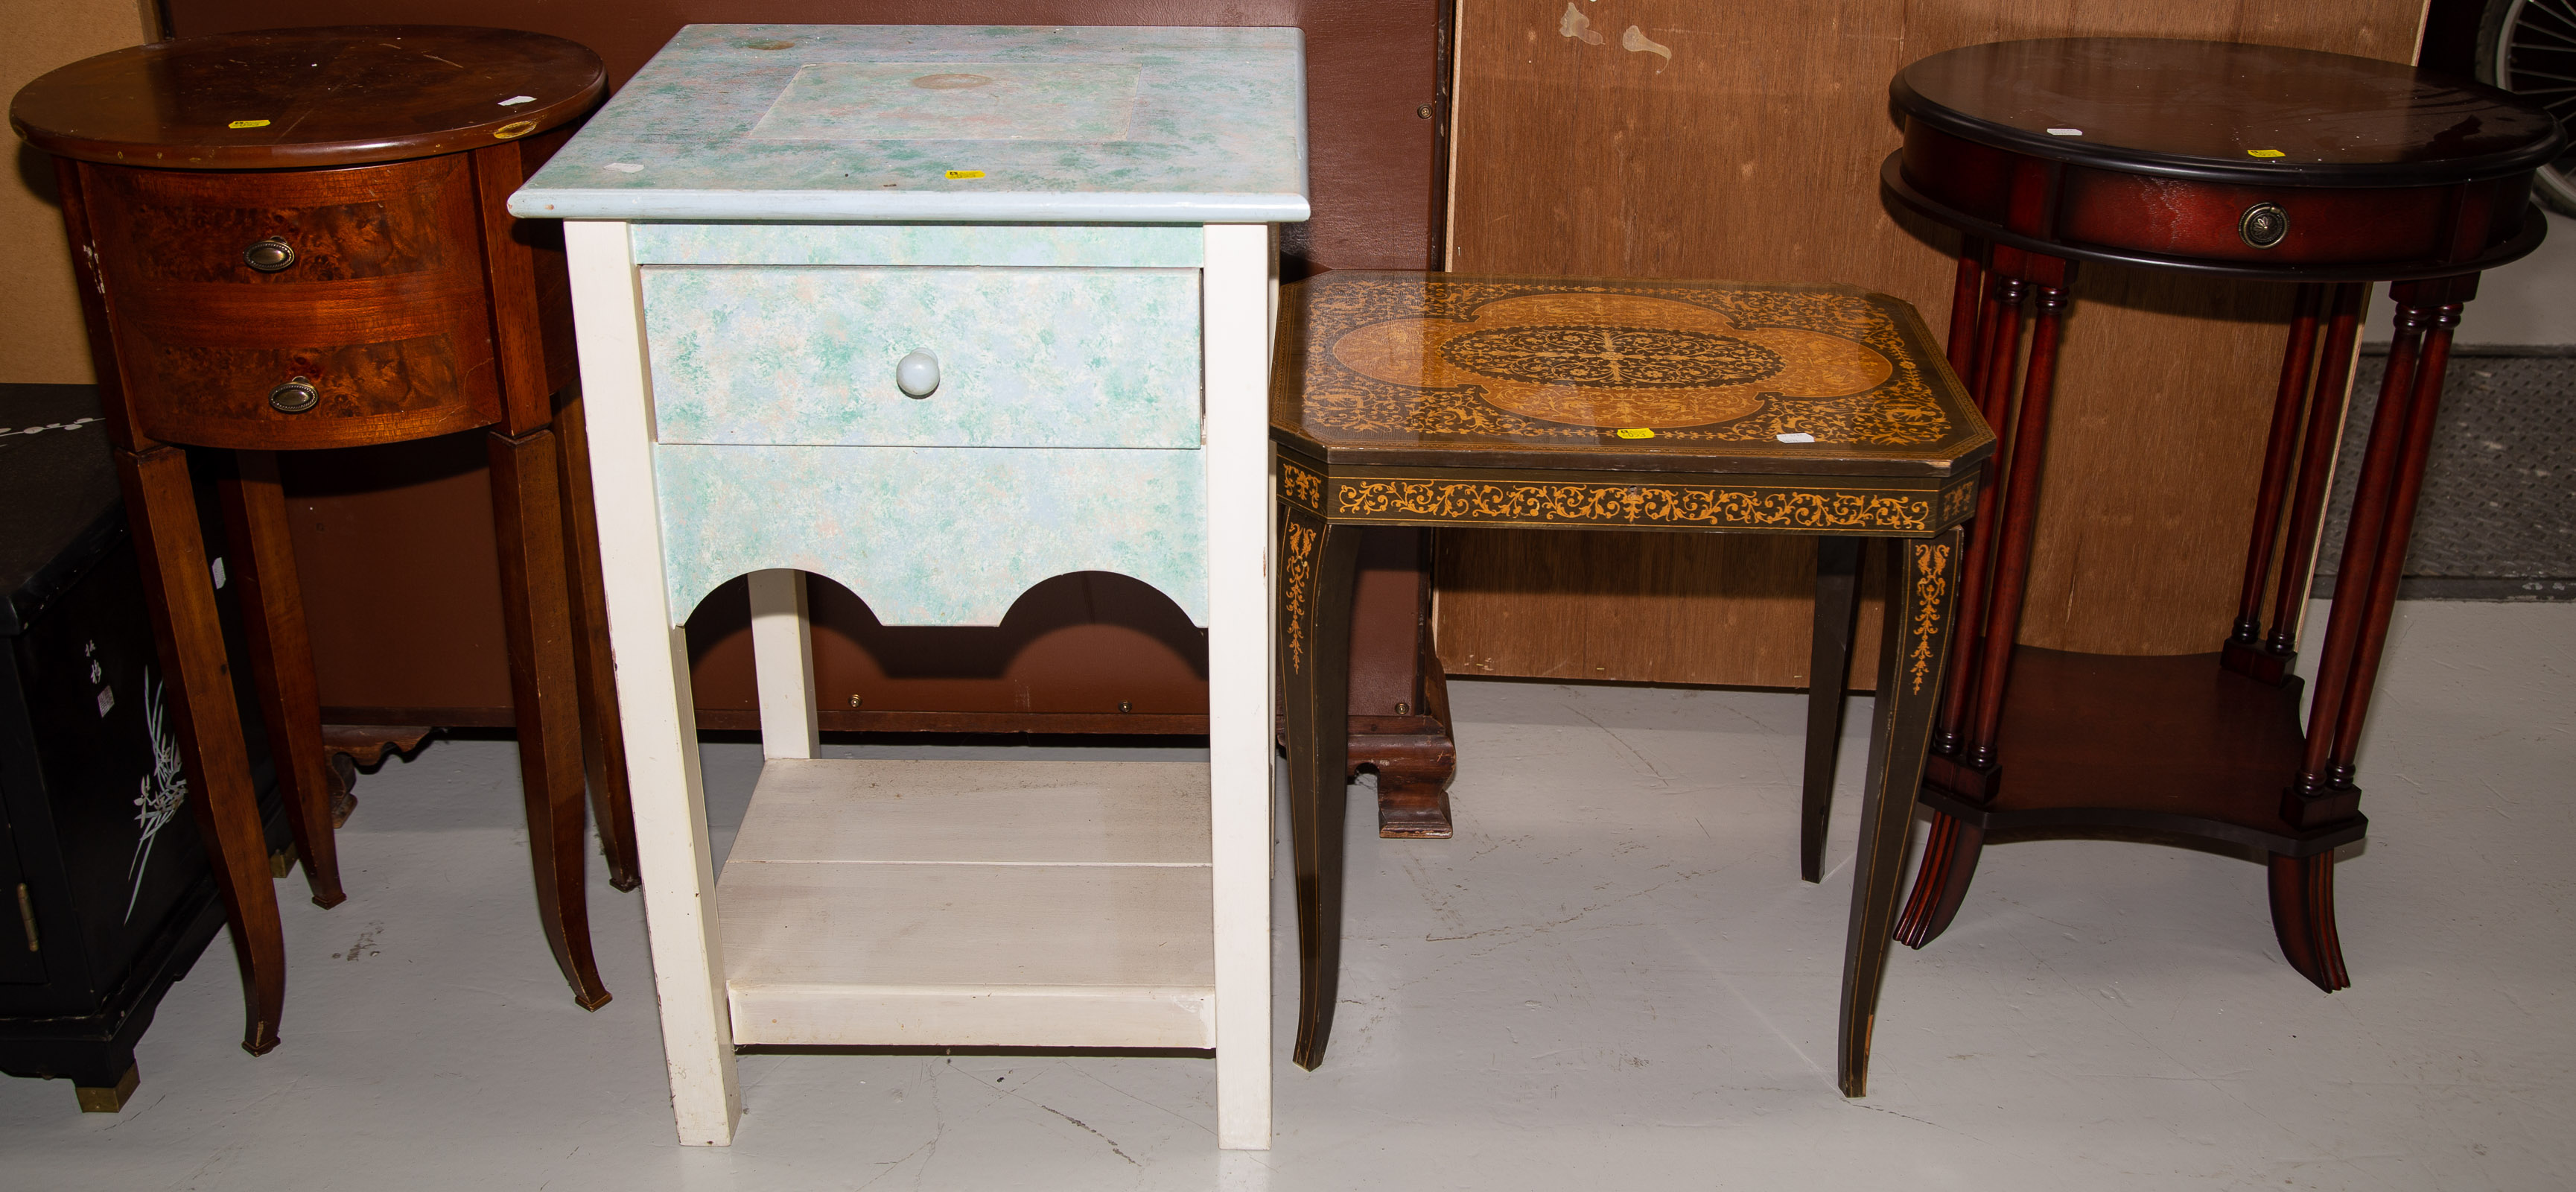 FOUR PIECES OF ASSORTED FURNITURE 338a88